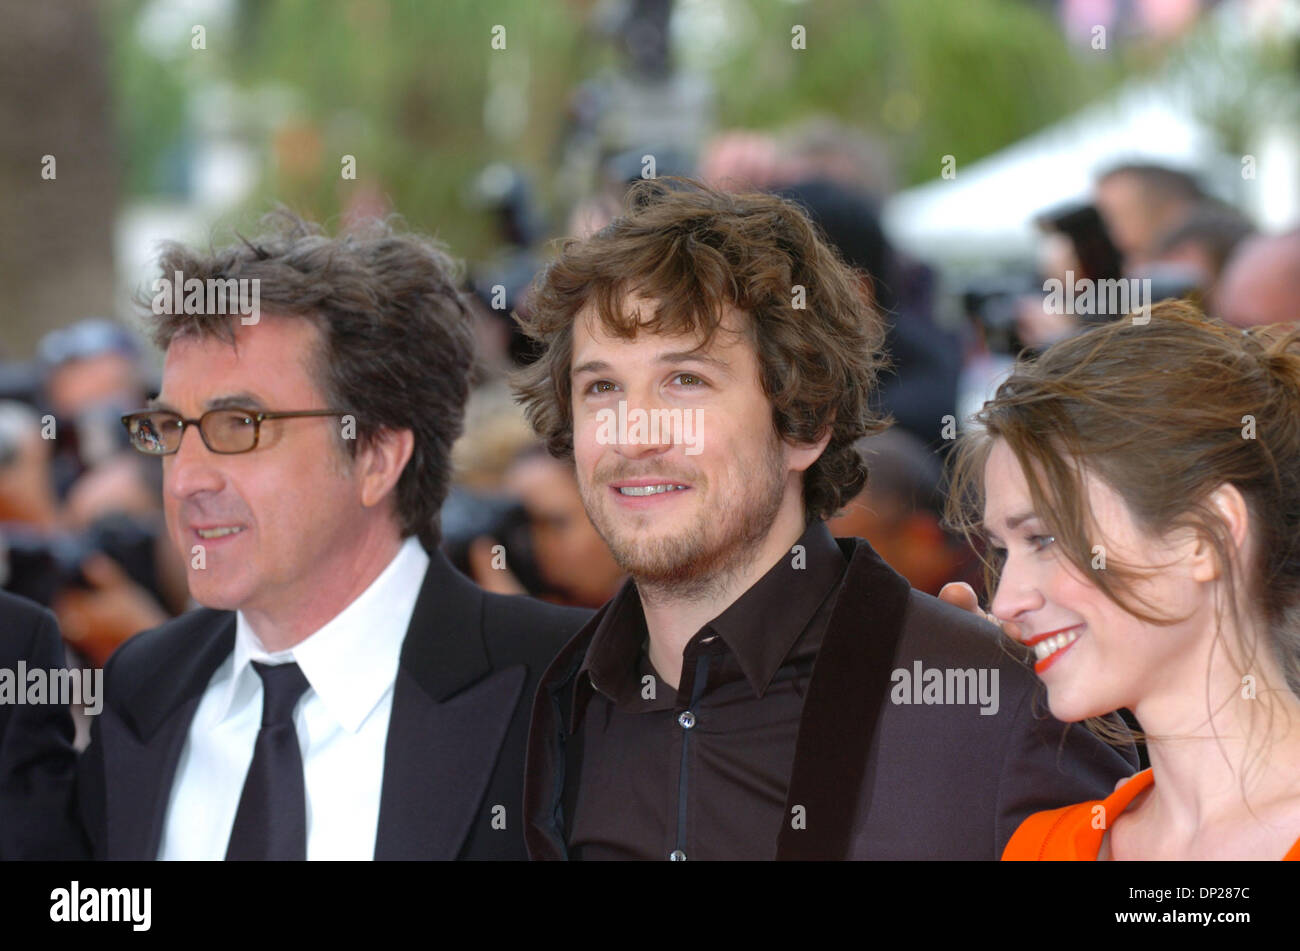 May 20, 2006; Cannes, FRANCE; FRANCOIS CLUZET and GUILLAUME CANET at the 'Selon Charlie' Premiere during the 59th Cannes International Film Festival.  Mandatory Credit: Photo by Frederic Injimbert/ZUMA Press. (©) Copyright 2006 by Frederic Injimbert Stock Photo